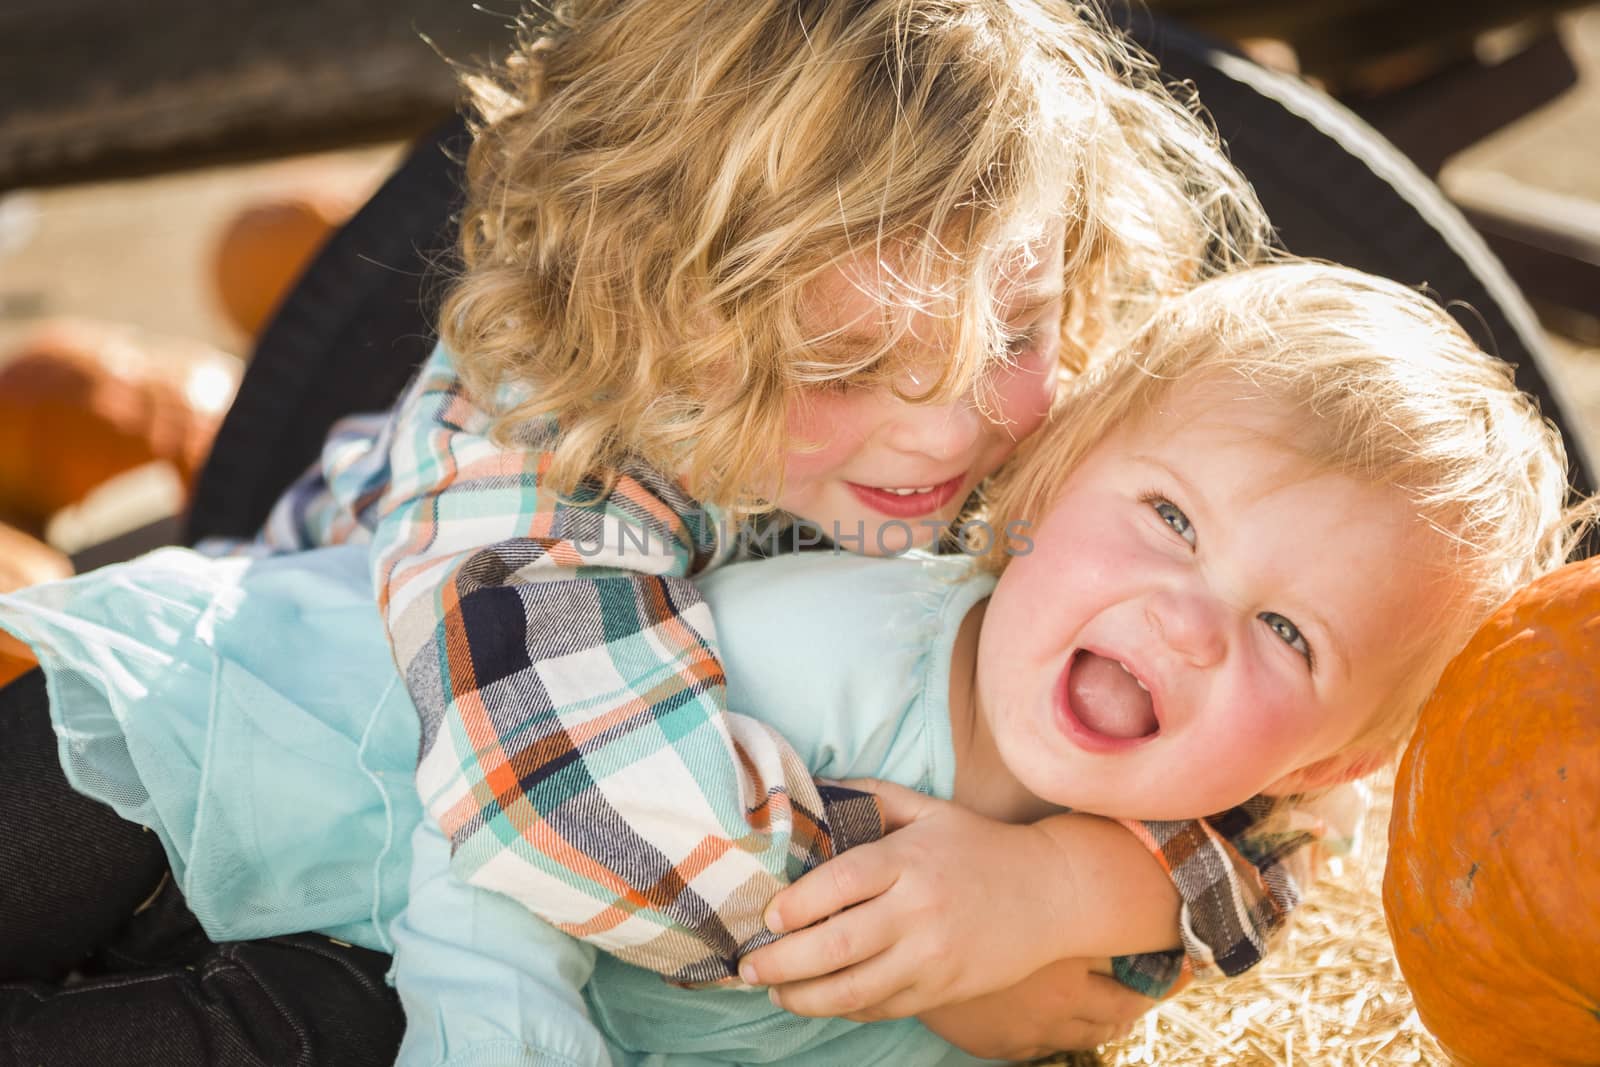 Sweet Little Boy Plays with His Baby Sister in a Rustic Ranch Setting at the Pumpkin Patch.